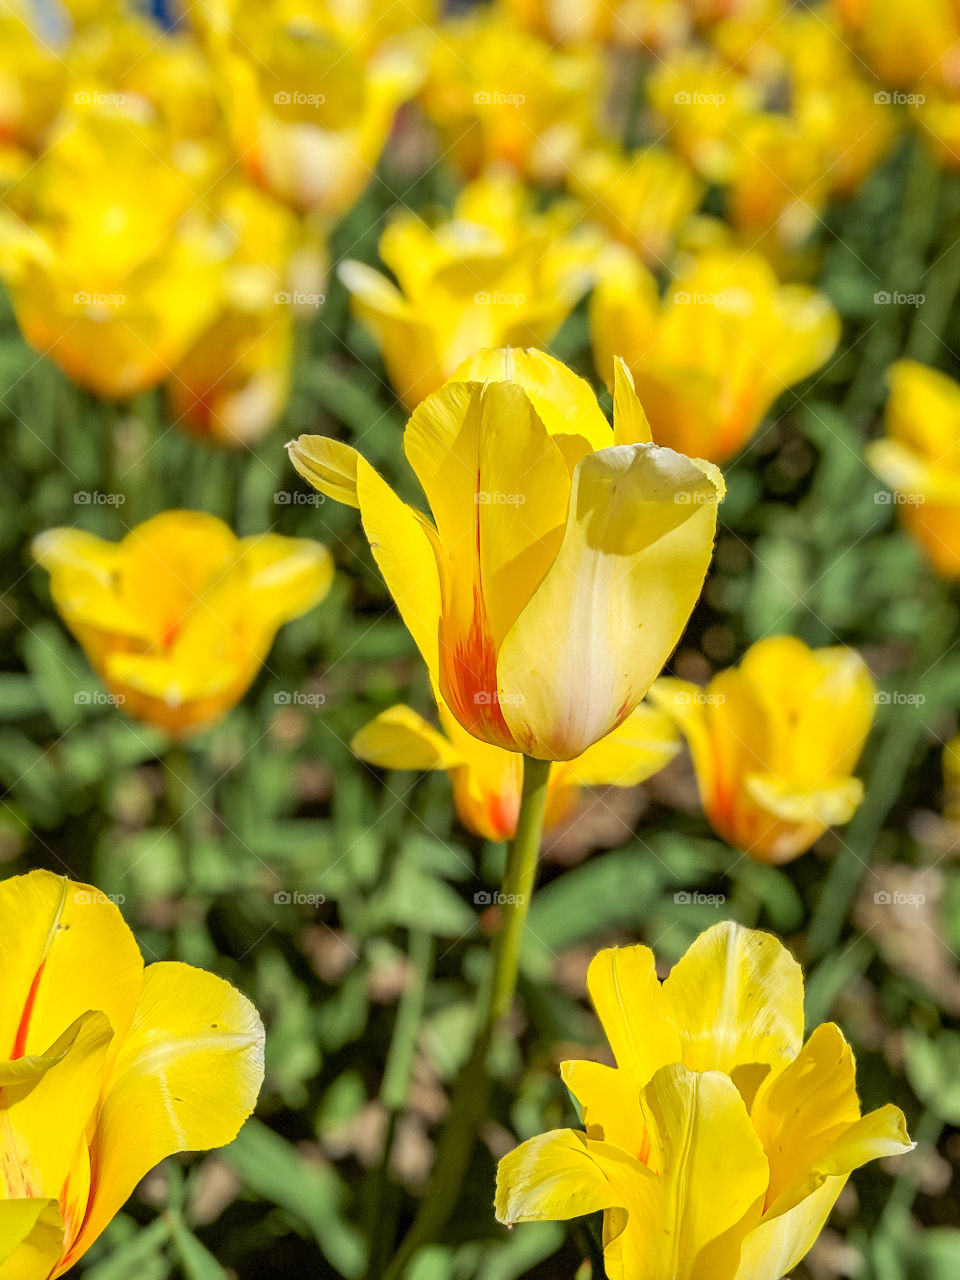 Vibrant Bright and Colorful Yellow Red Orange Tulip Flower